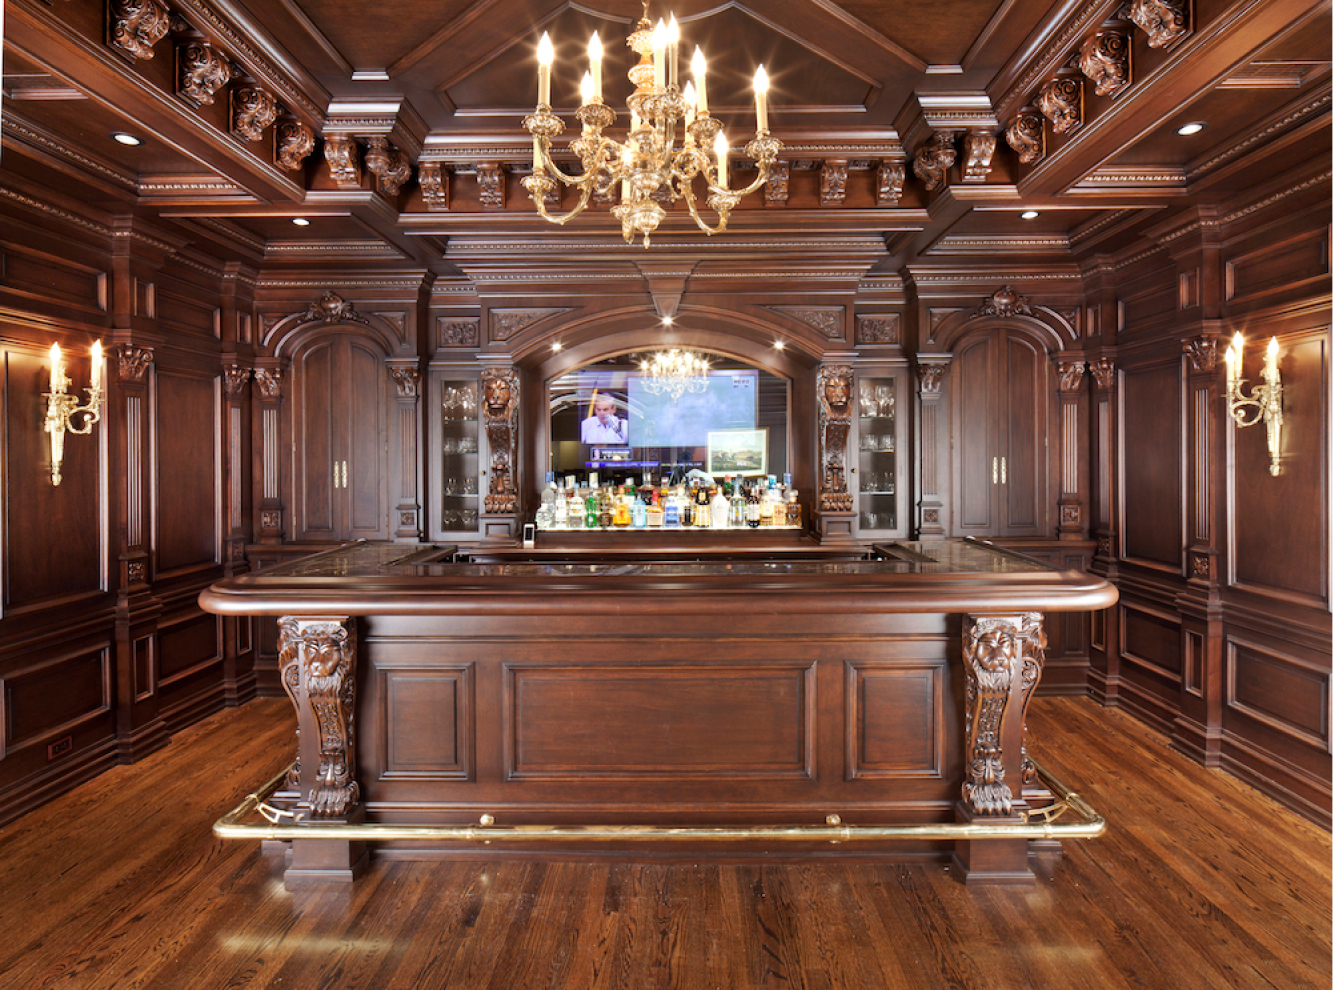 Bespoke Residential Royal Bar Furniture Setup in Classic Wood Carving Design- Carved in India - Brand Royalzig Luxury Furniture